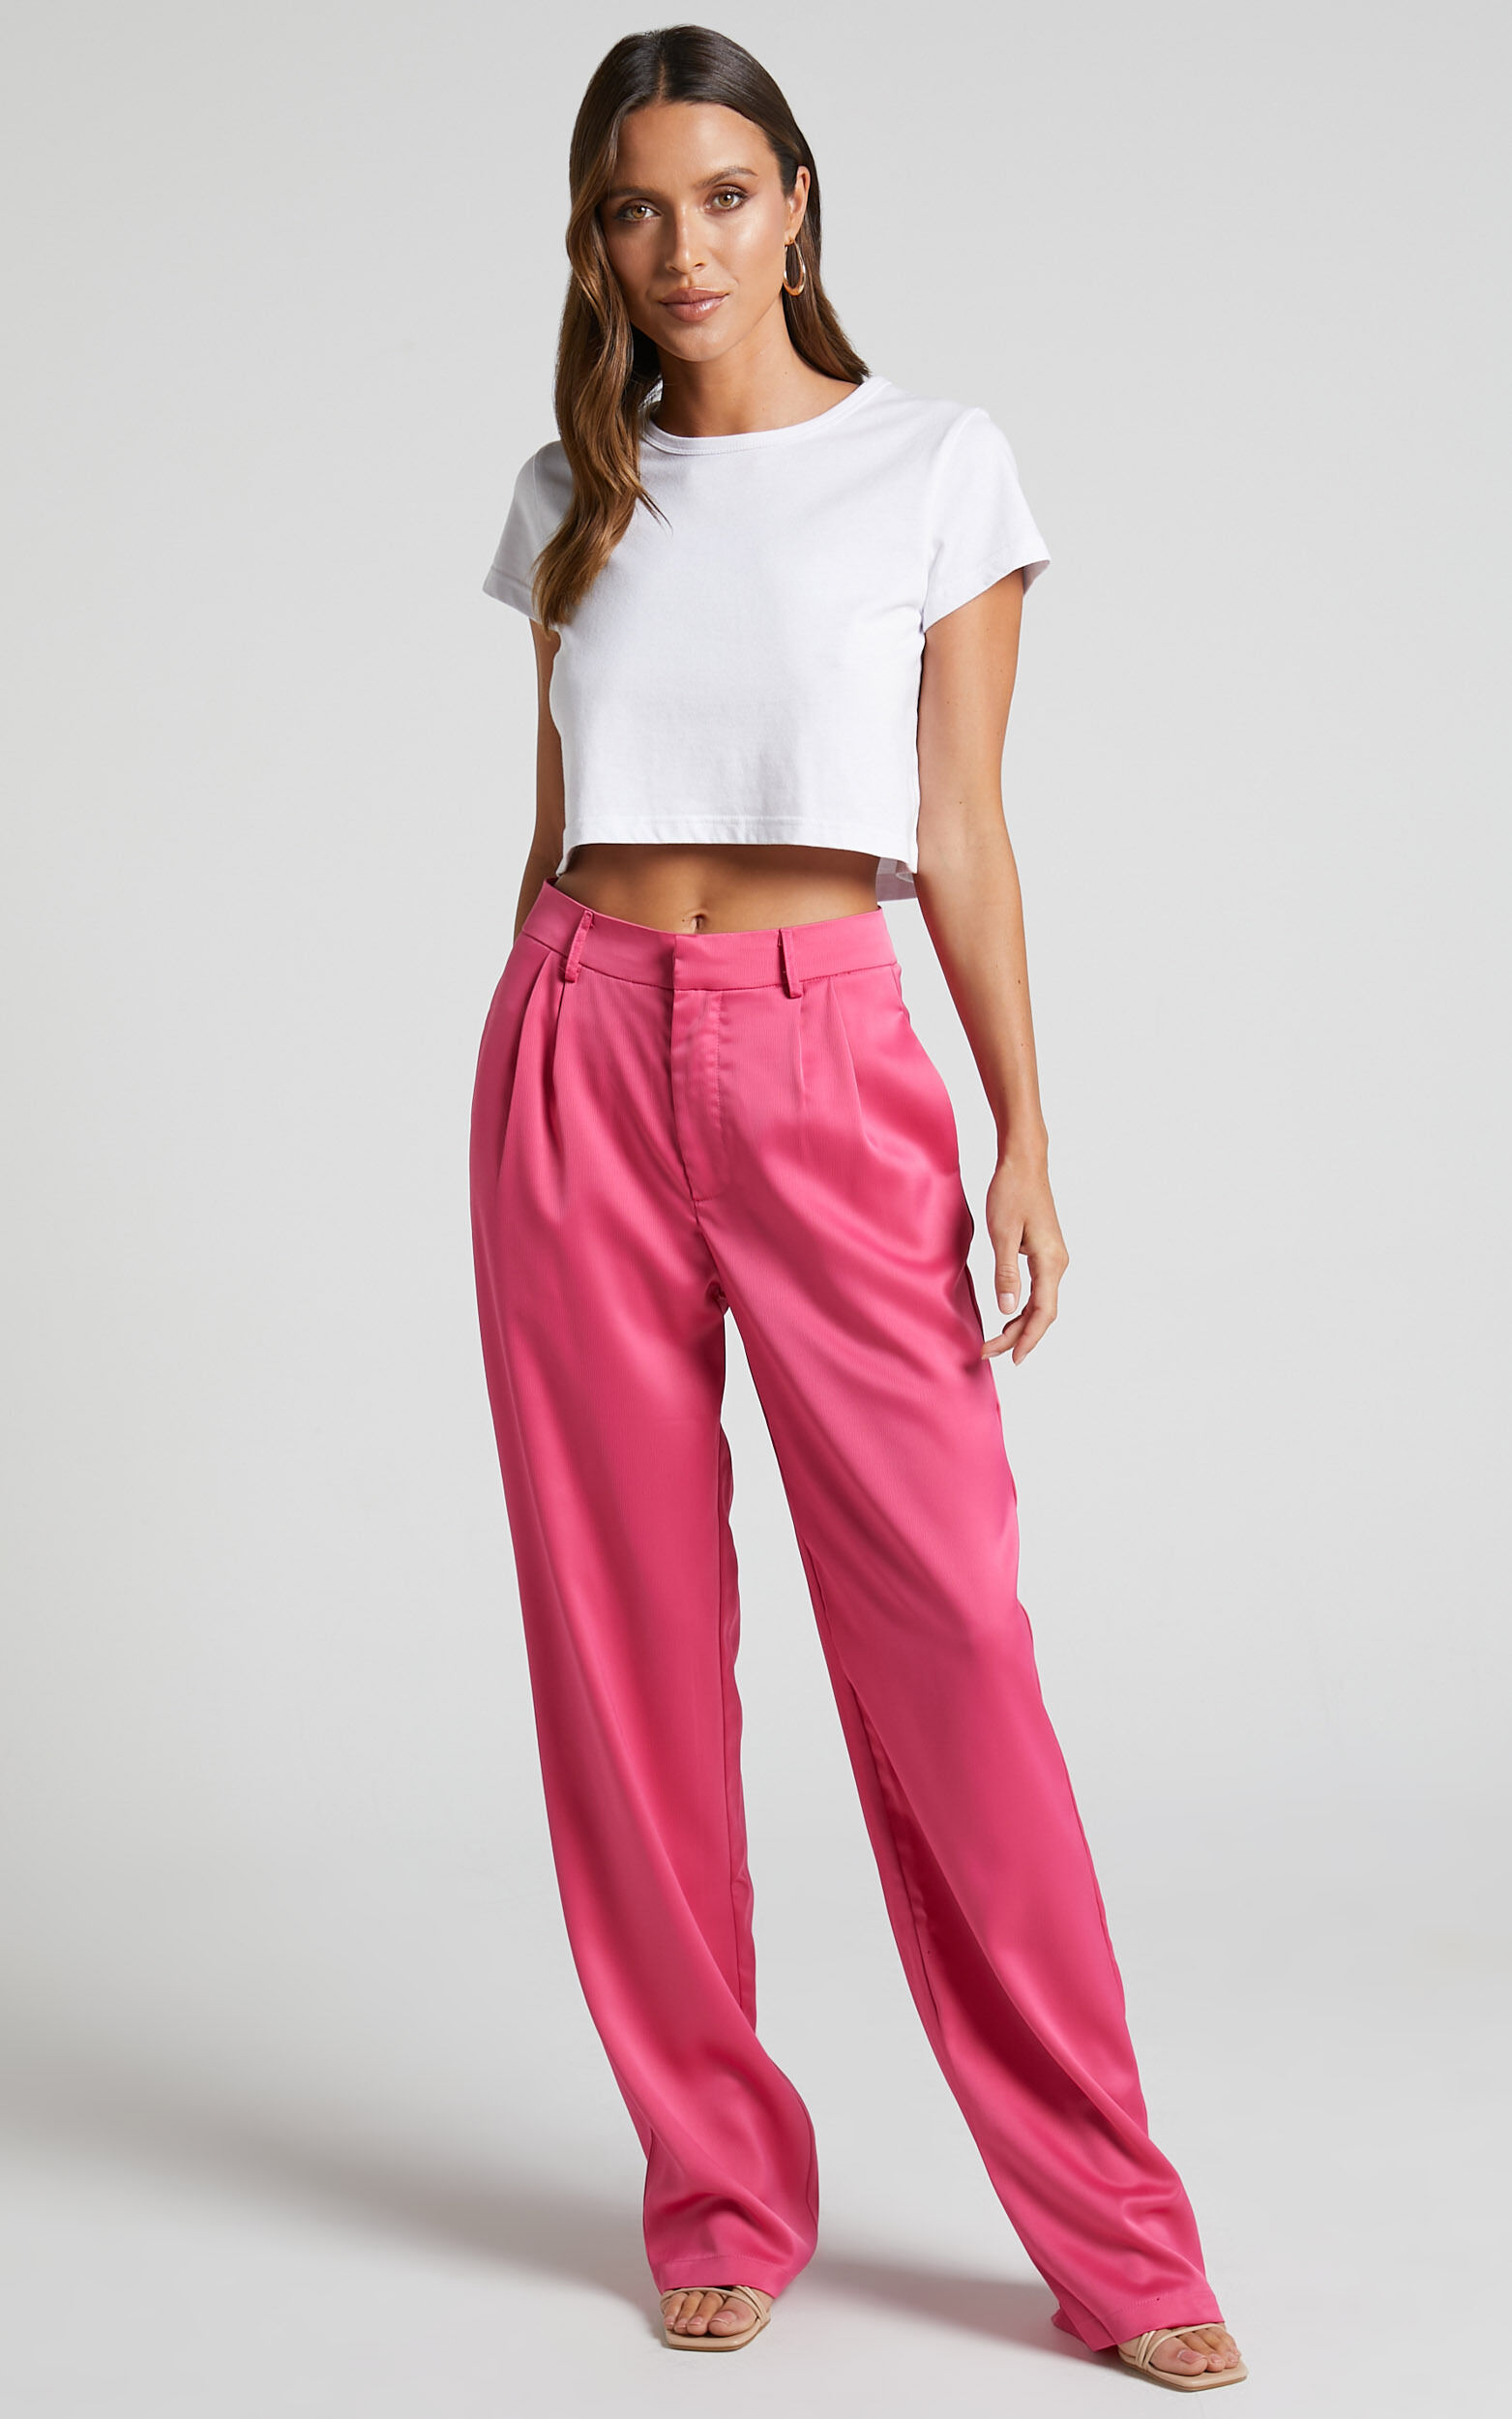 Jannie Pants - High Waist Tailored Pants in Pink - 04, PNK1